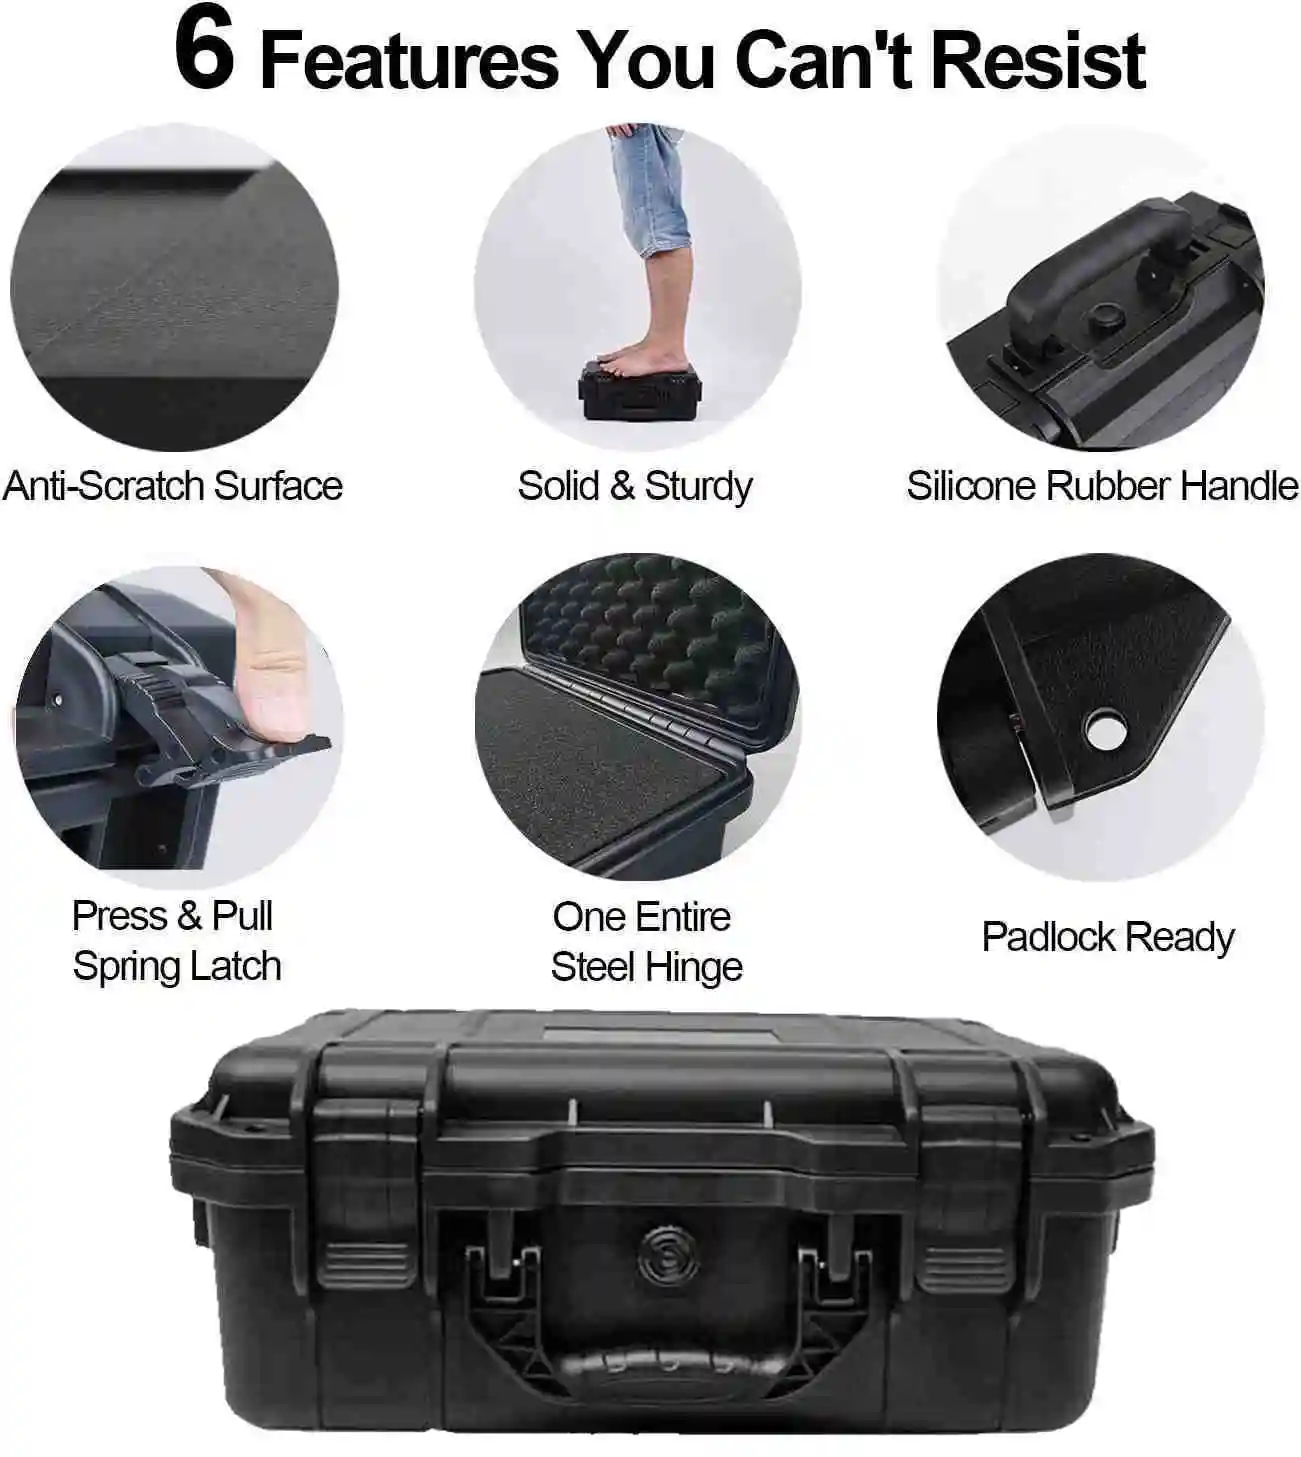 Waterproof Hard Carry Case Bag Tool Kits with Sponge Storage Box Safety Protector Organizer Hardware toolbox Impact Resistant enlarge